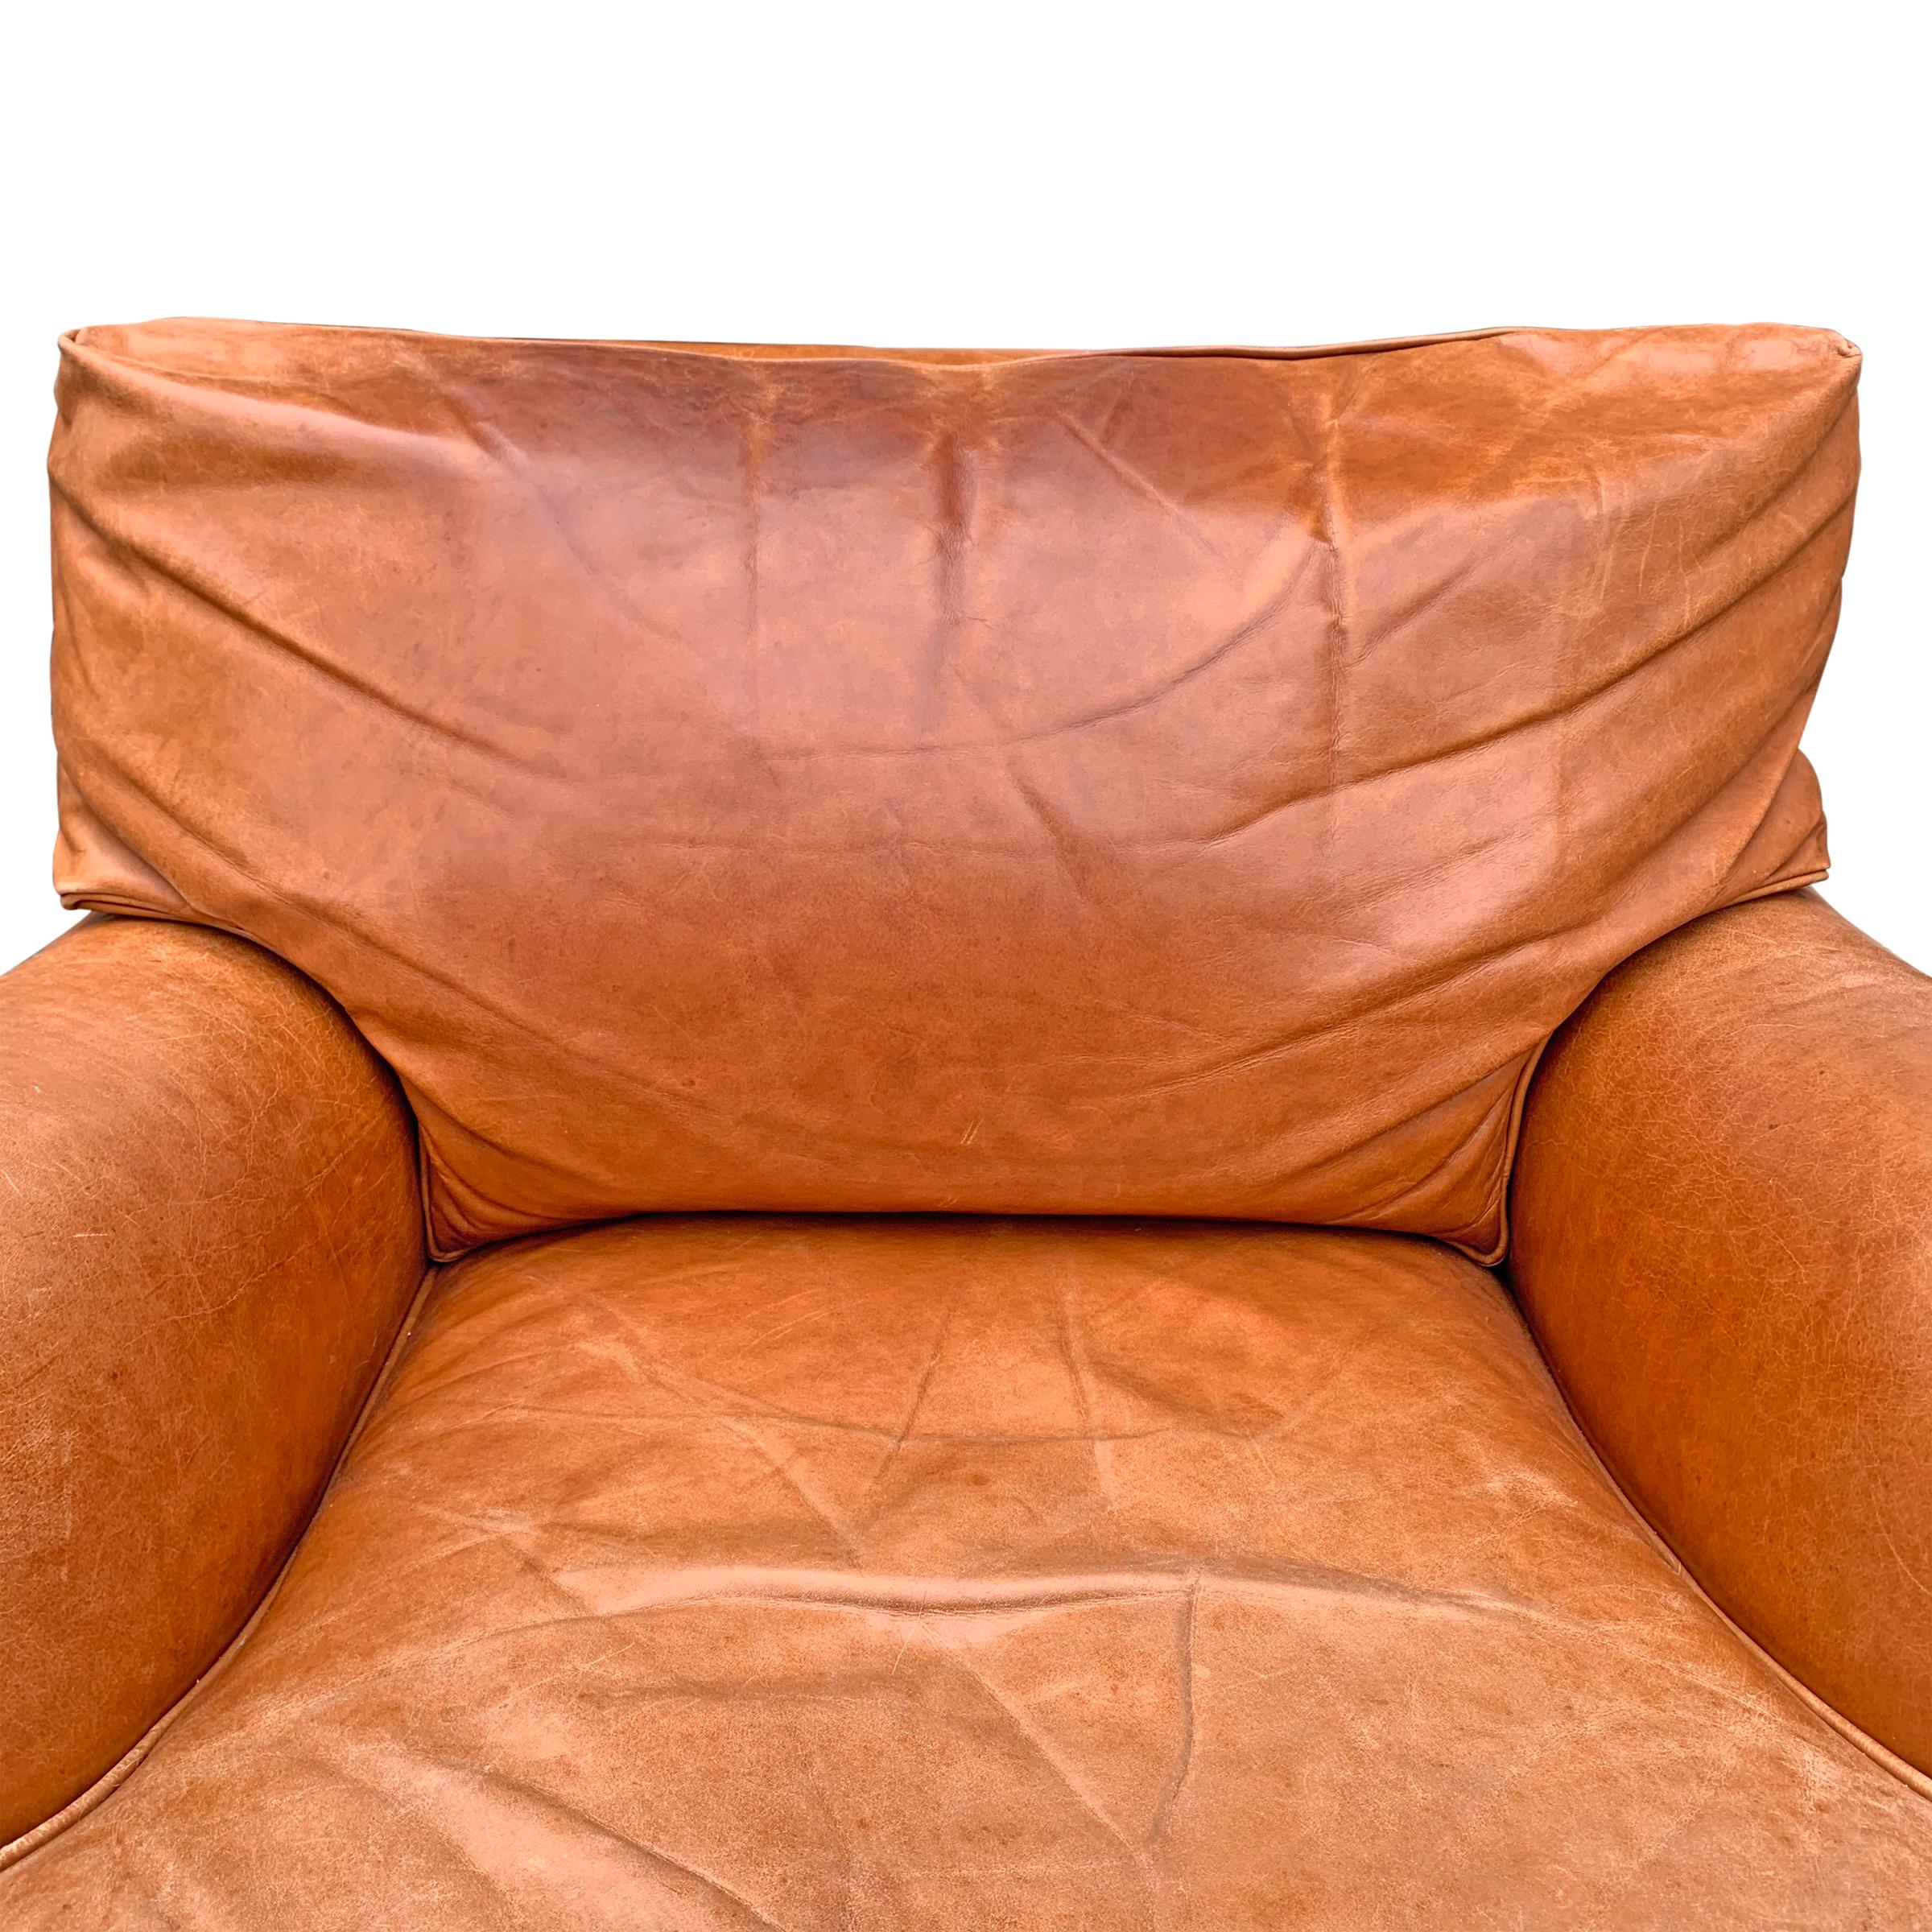 American Coach Leather English Roll Armchair